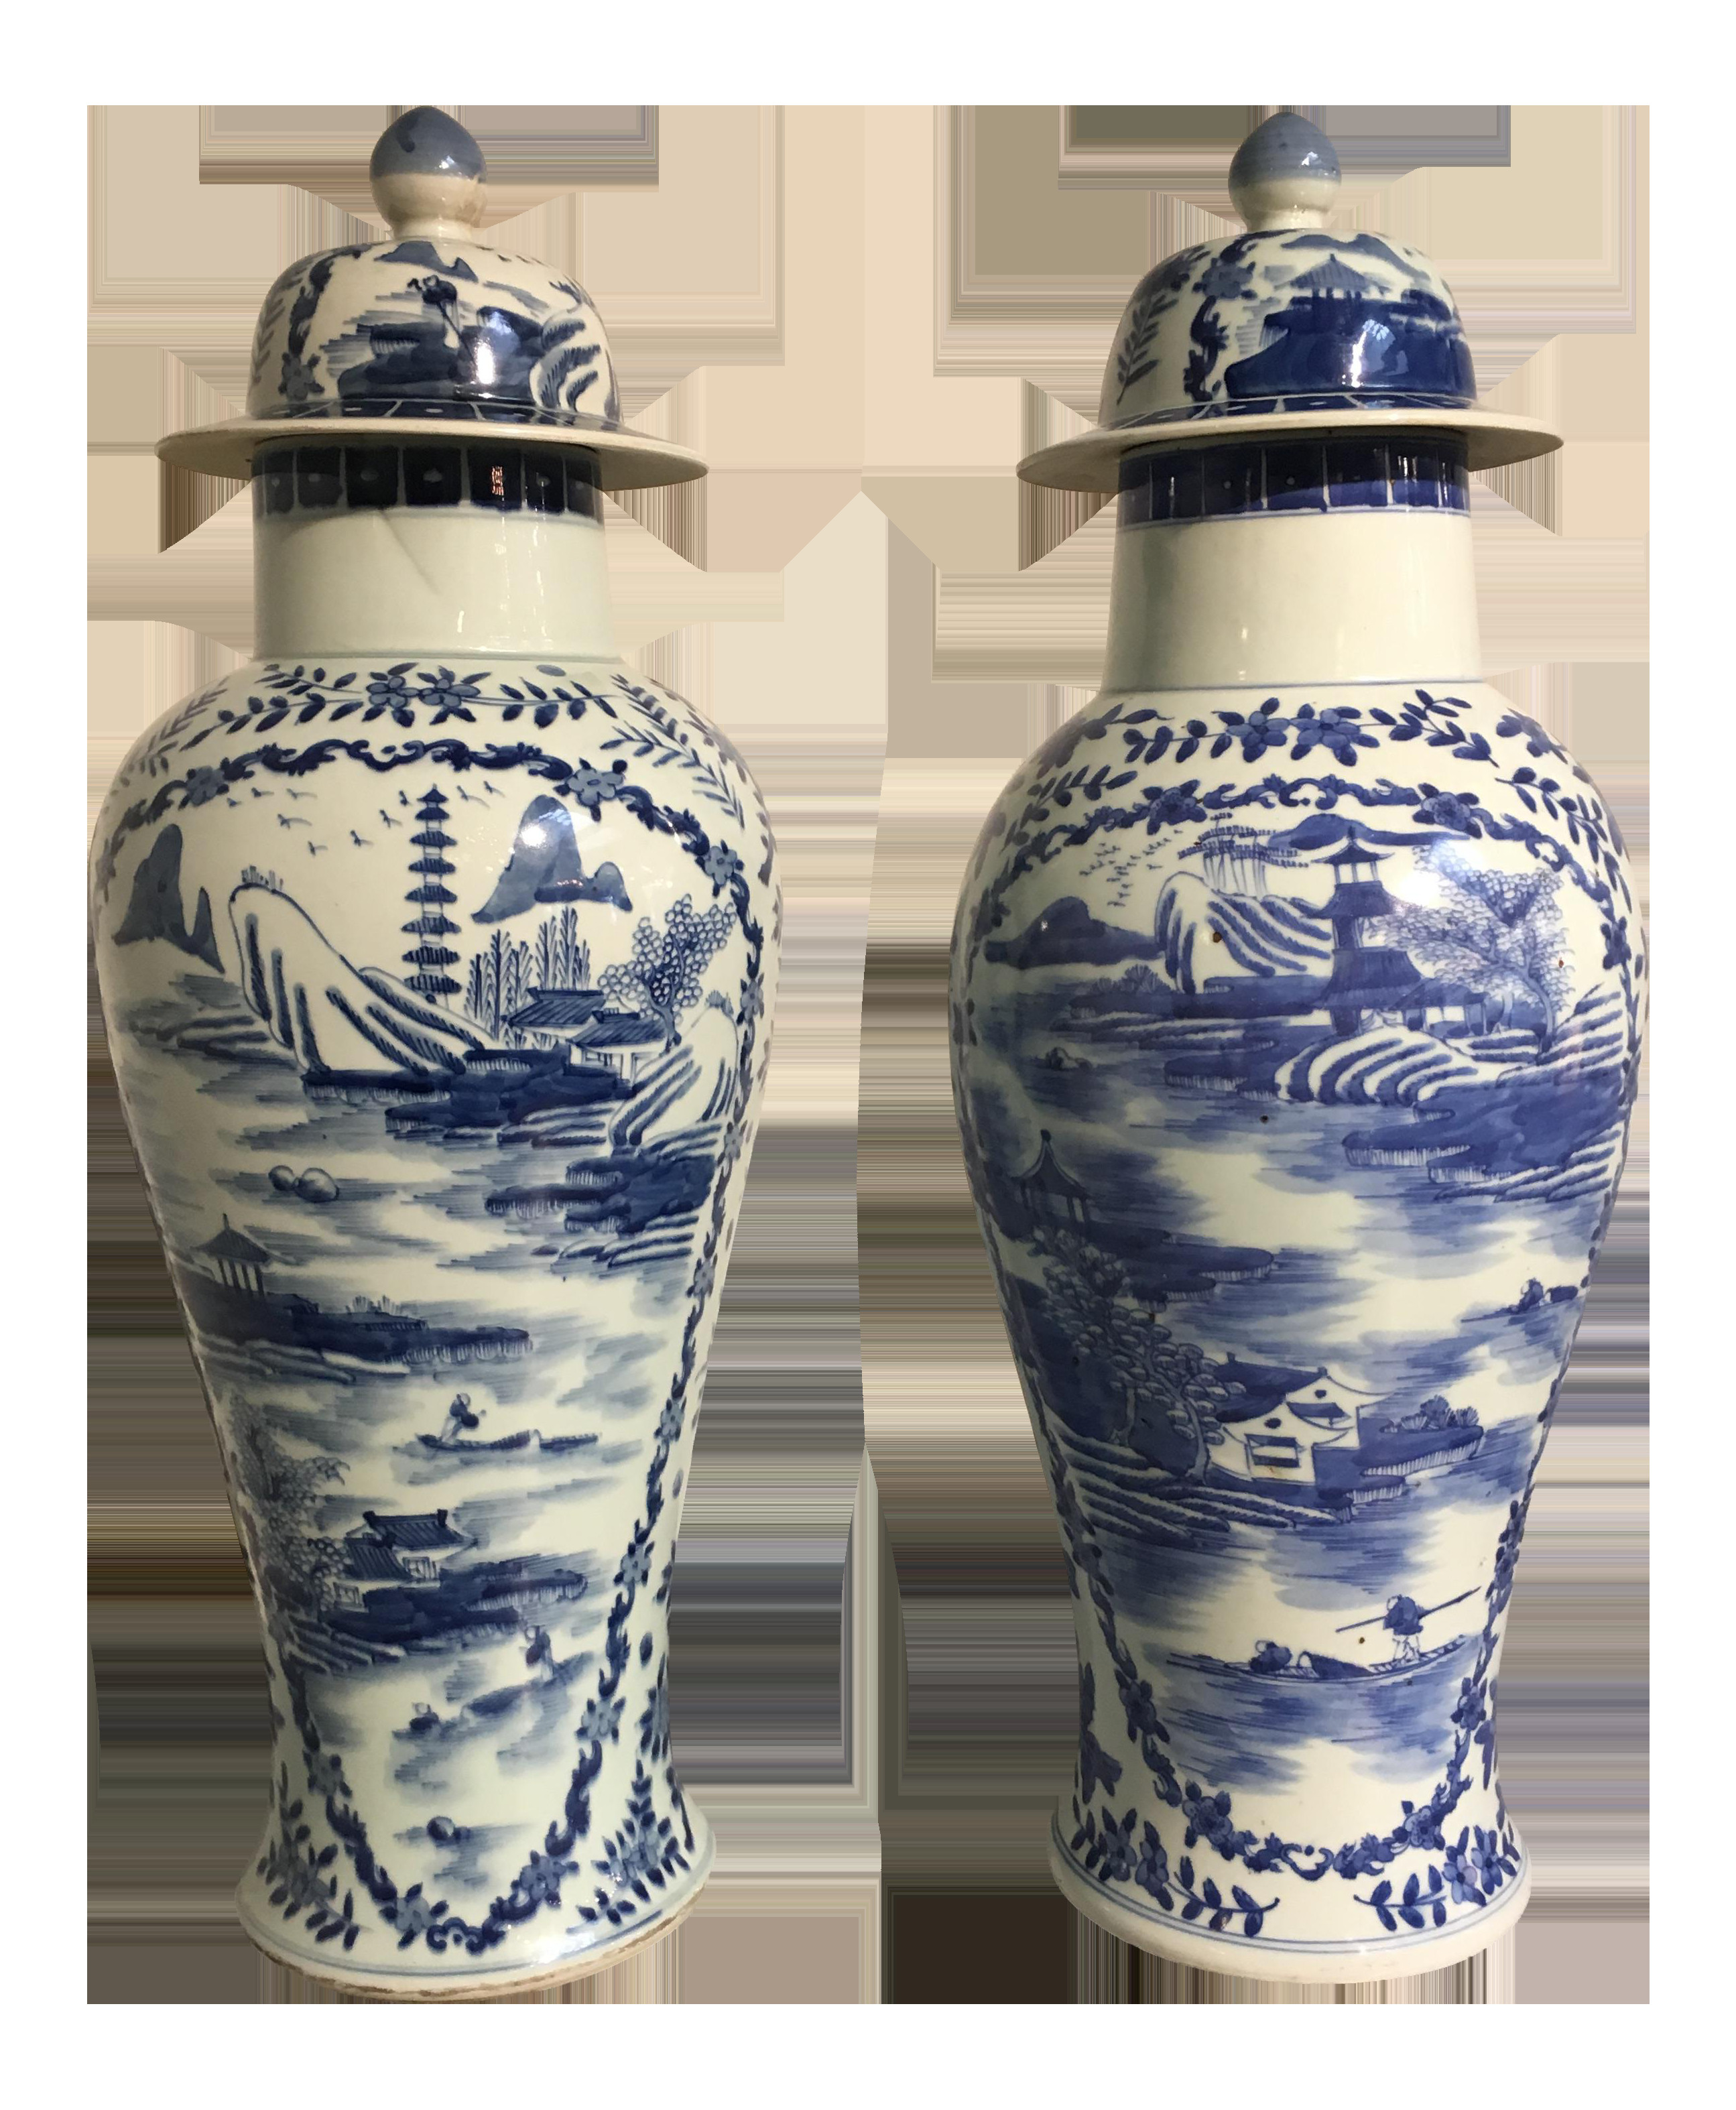 11 Fantastic Ancient Chinese Porcelain Vase 2024 free download ancient chinese porcelain vase of world class chinese tall blue and white baluster covered porcelain with world class chinese tall blue and white baluster covered porcelain vases circa 1900 